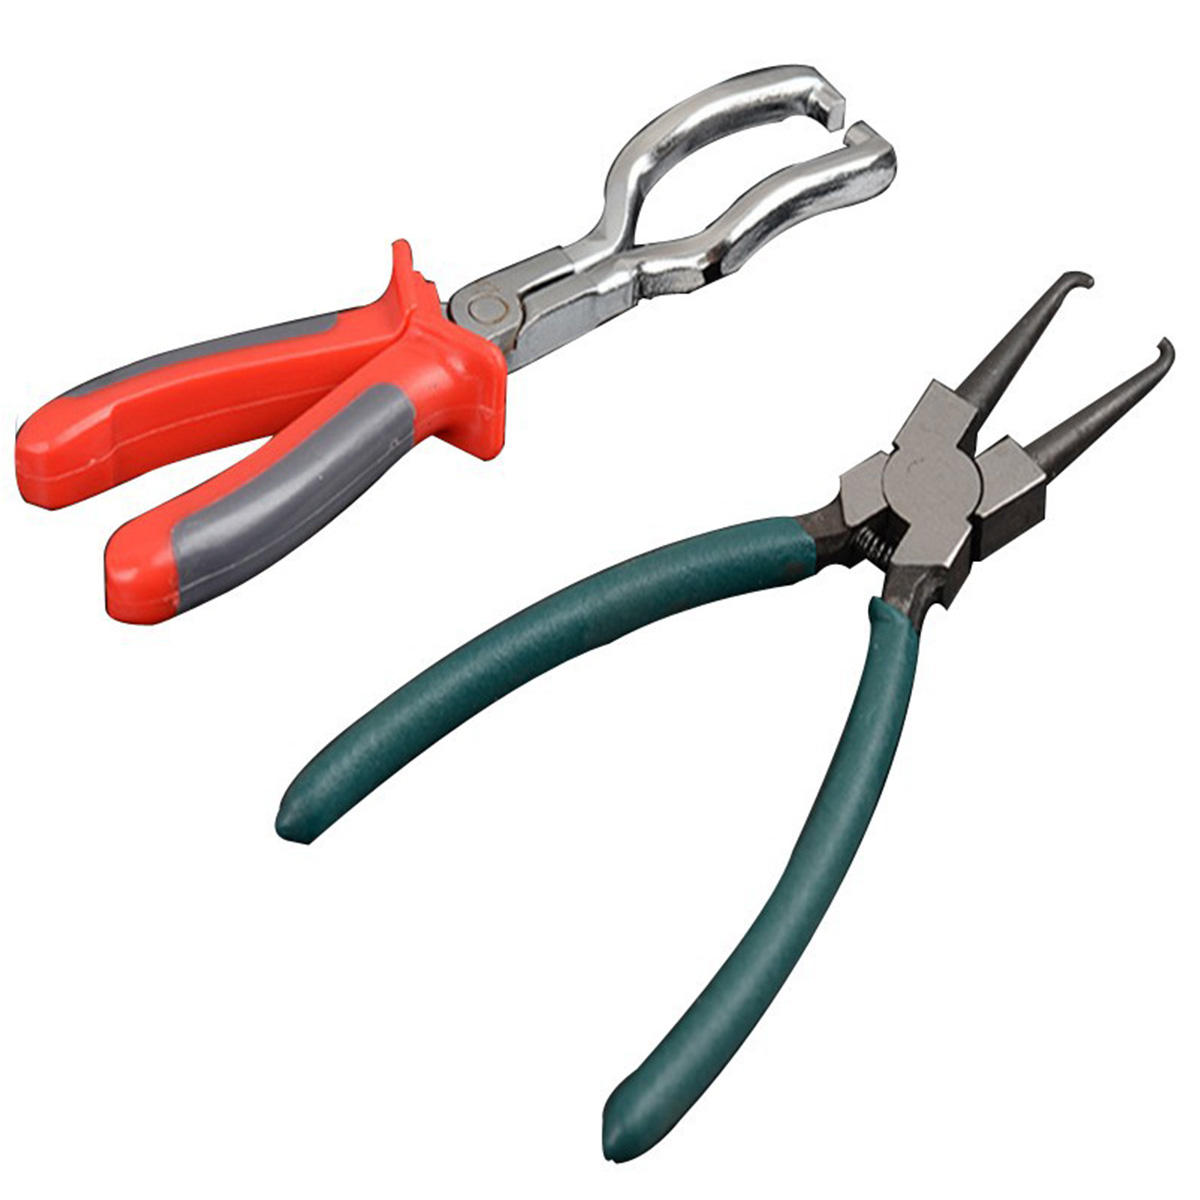 225mm Fuel Line Pliers Petrol Clip Pipe Hose Release Disconnect Removal  Tool Kit Sale - Banggood USA-arrival notice-arrival notice